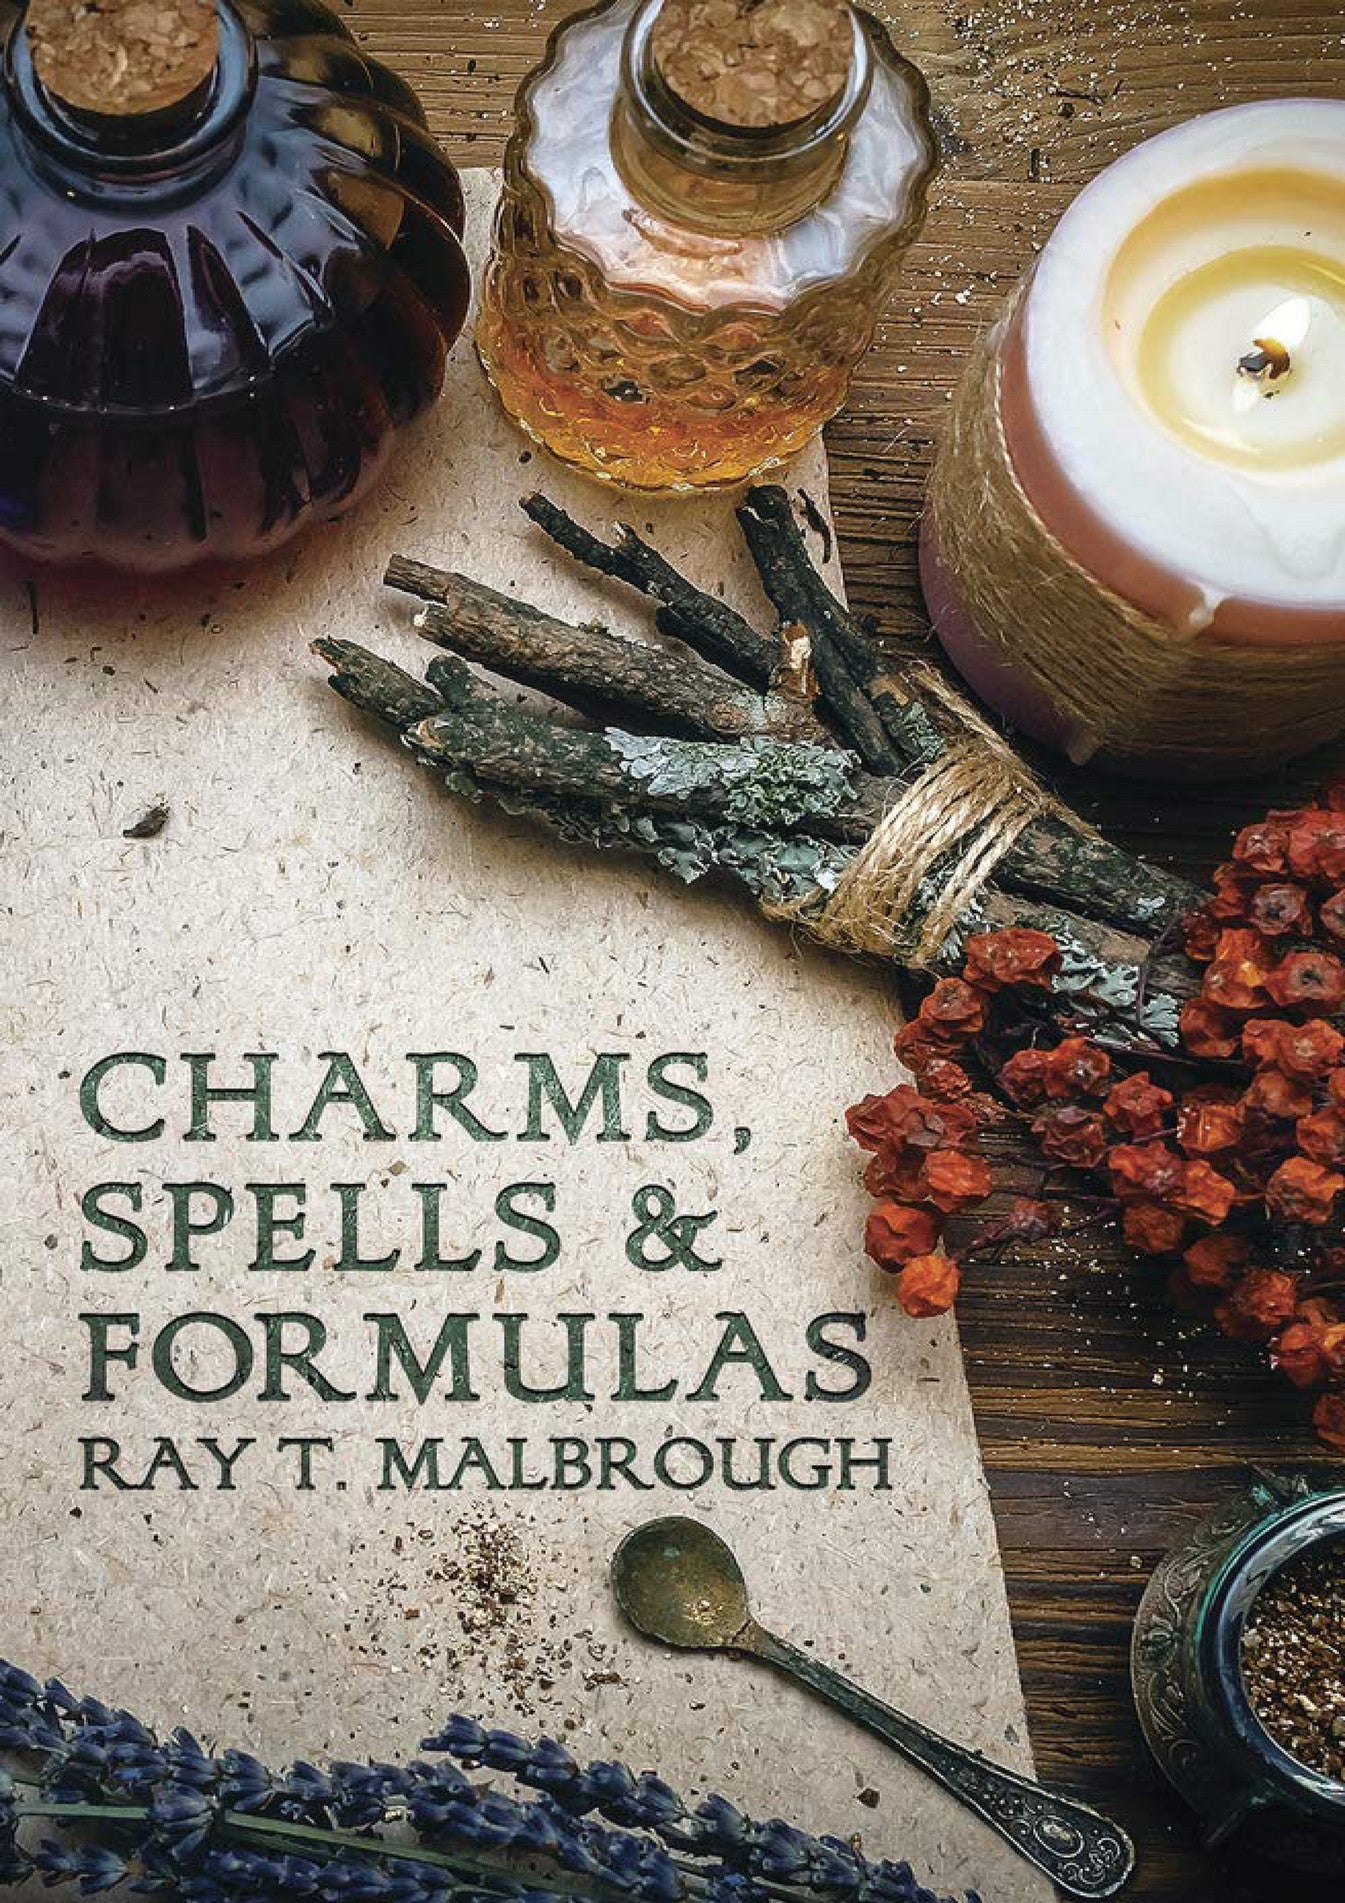 Charms, Spells, and Formulas By Ray T. Malbrough - Shop Cosmic Healing